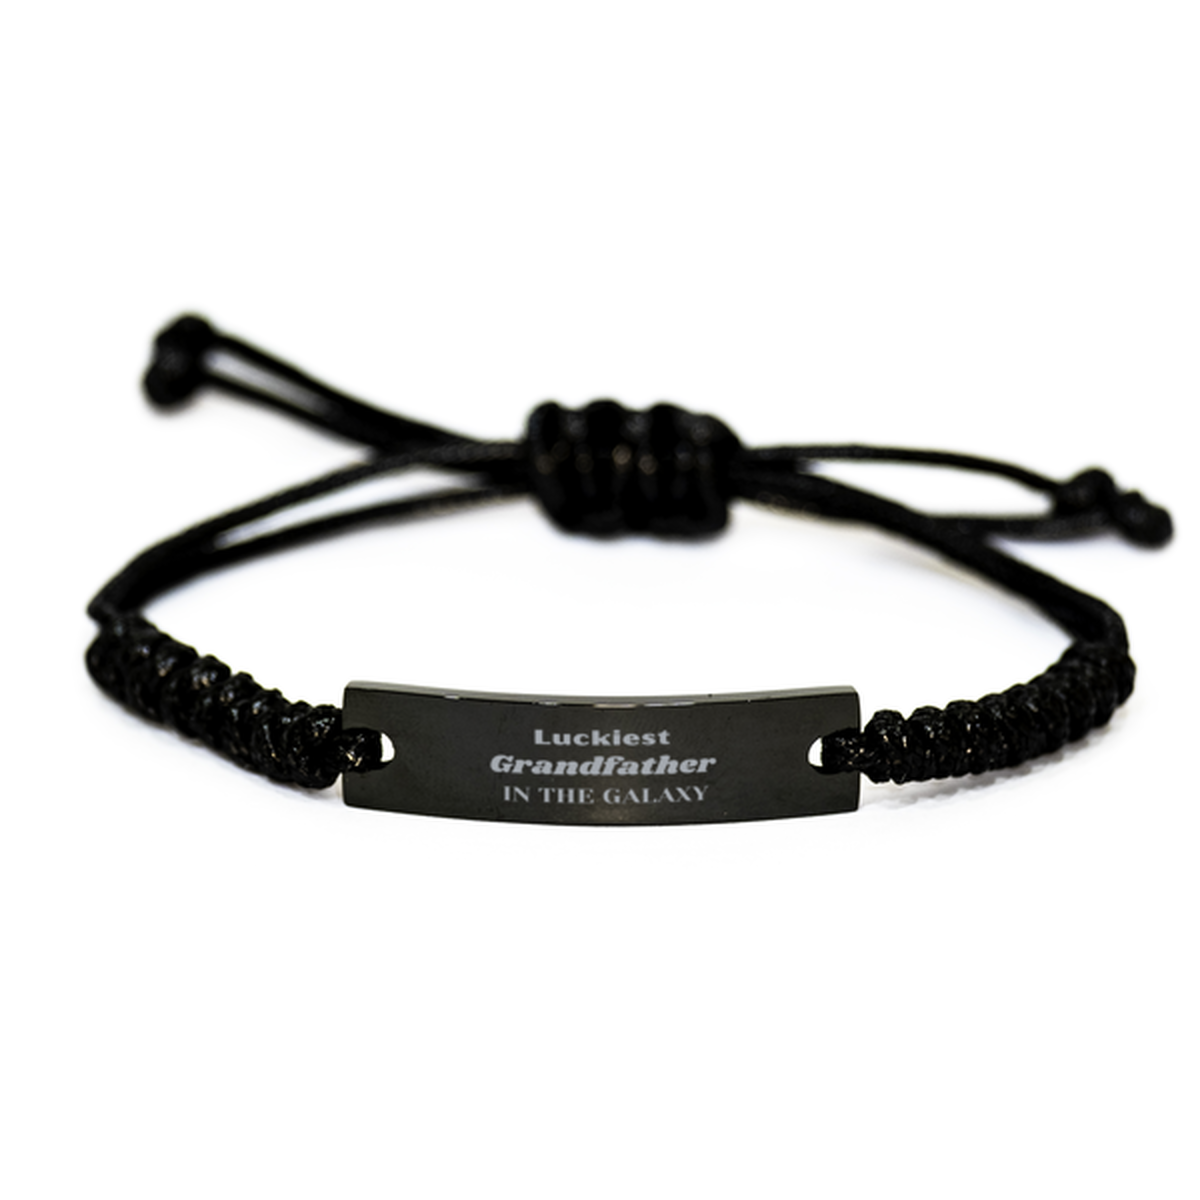 Luckiest Grandfather in the Galaxy, To My Grandfather Engraved Gifts, Christmas Grandfather Black Rope Bracelet Gifts, X-mas Birthday Unique Gifts For Grandfather Men Women